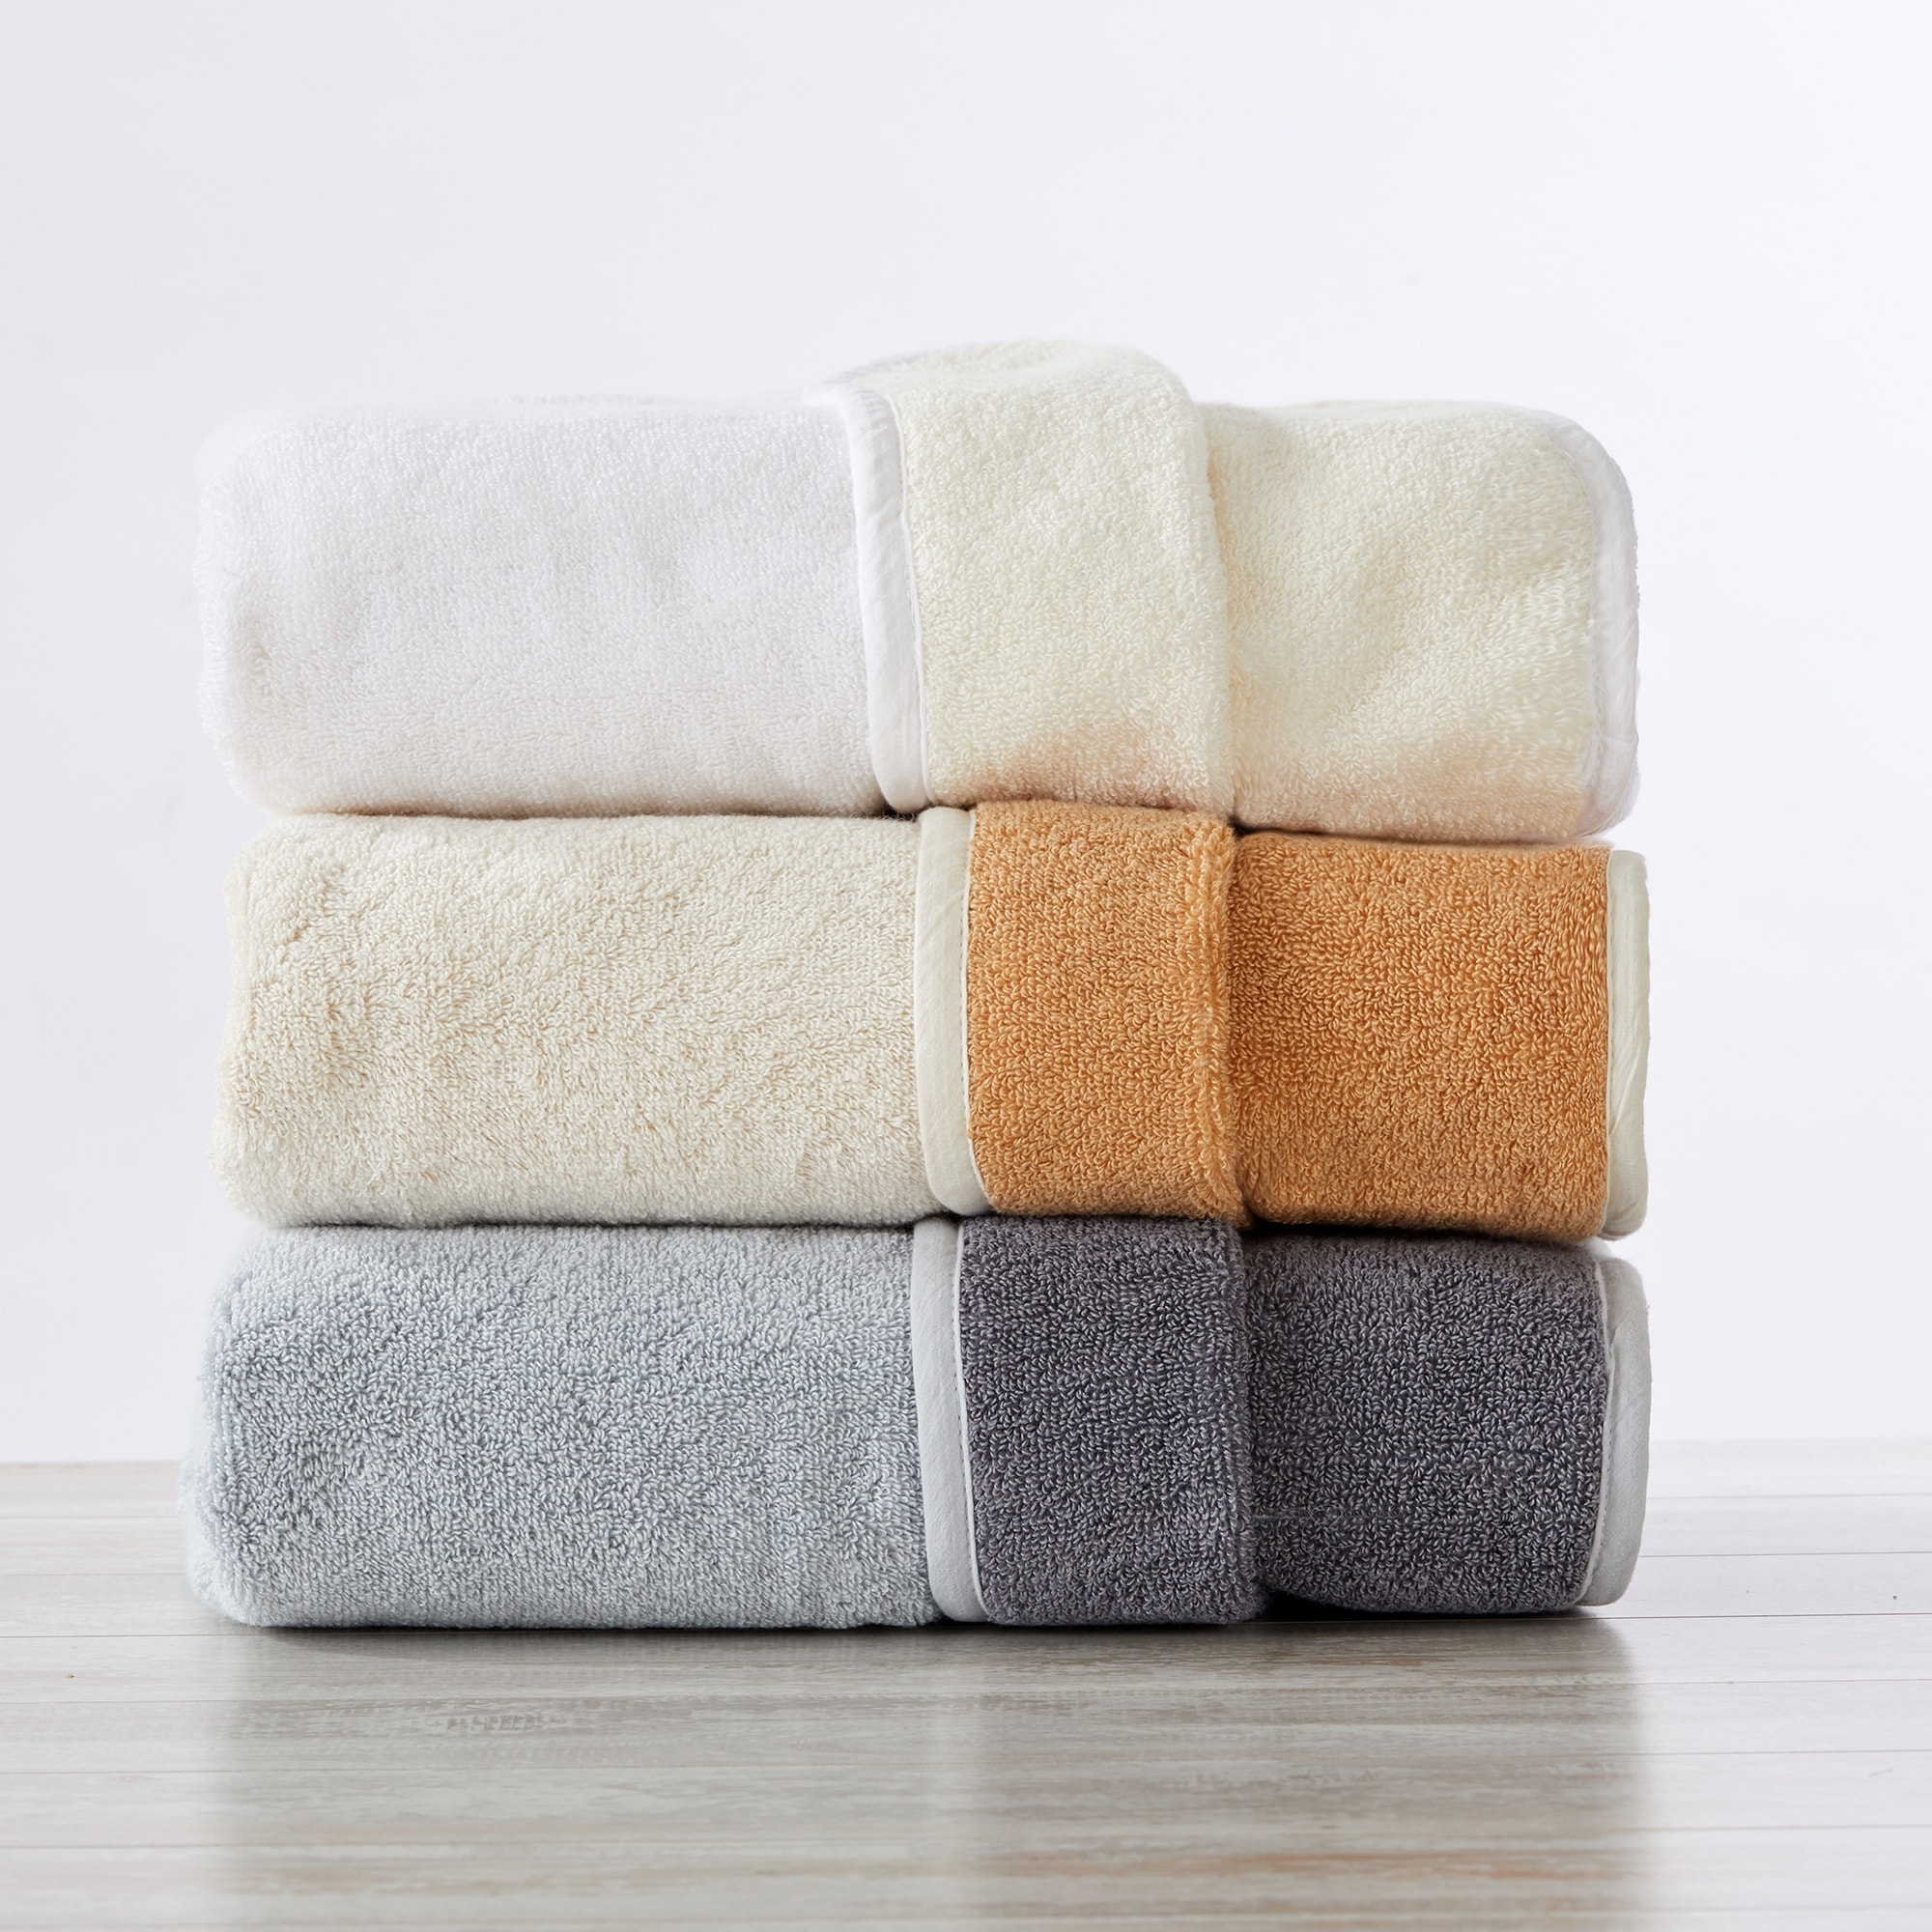 https://ak1.ostkcdn.com/images/products/is/images/direct/15cc514da36760ab998efcb97125e7afedfa0952/Great-Bay-Home-Two-Toned-Reversible-Quick-Dry-Towel-Set-Vanessa-Collection.jpg